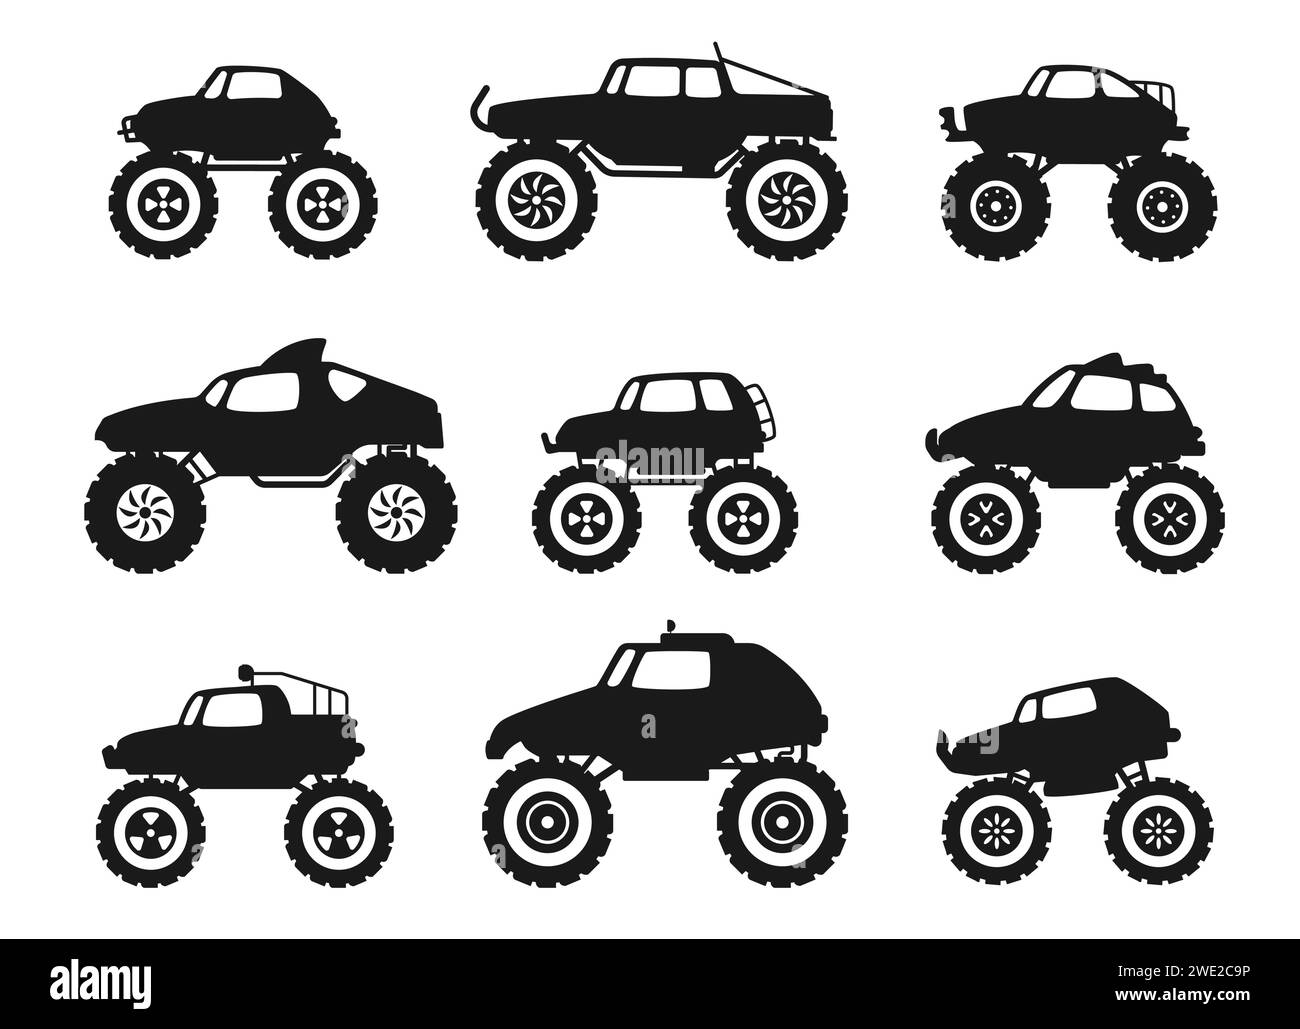 Black monster truck icons. Diesel 4x4 off road vehicle with tires, wheels and exhaust, turbo diesel truck with flat bumpers and flames. Vector Stock Vector